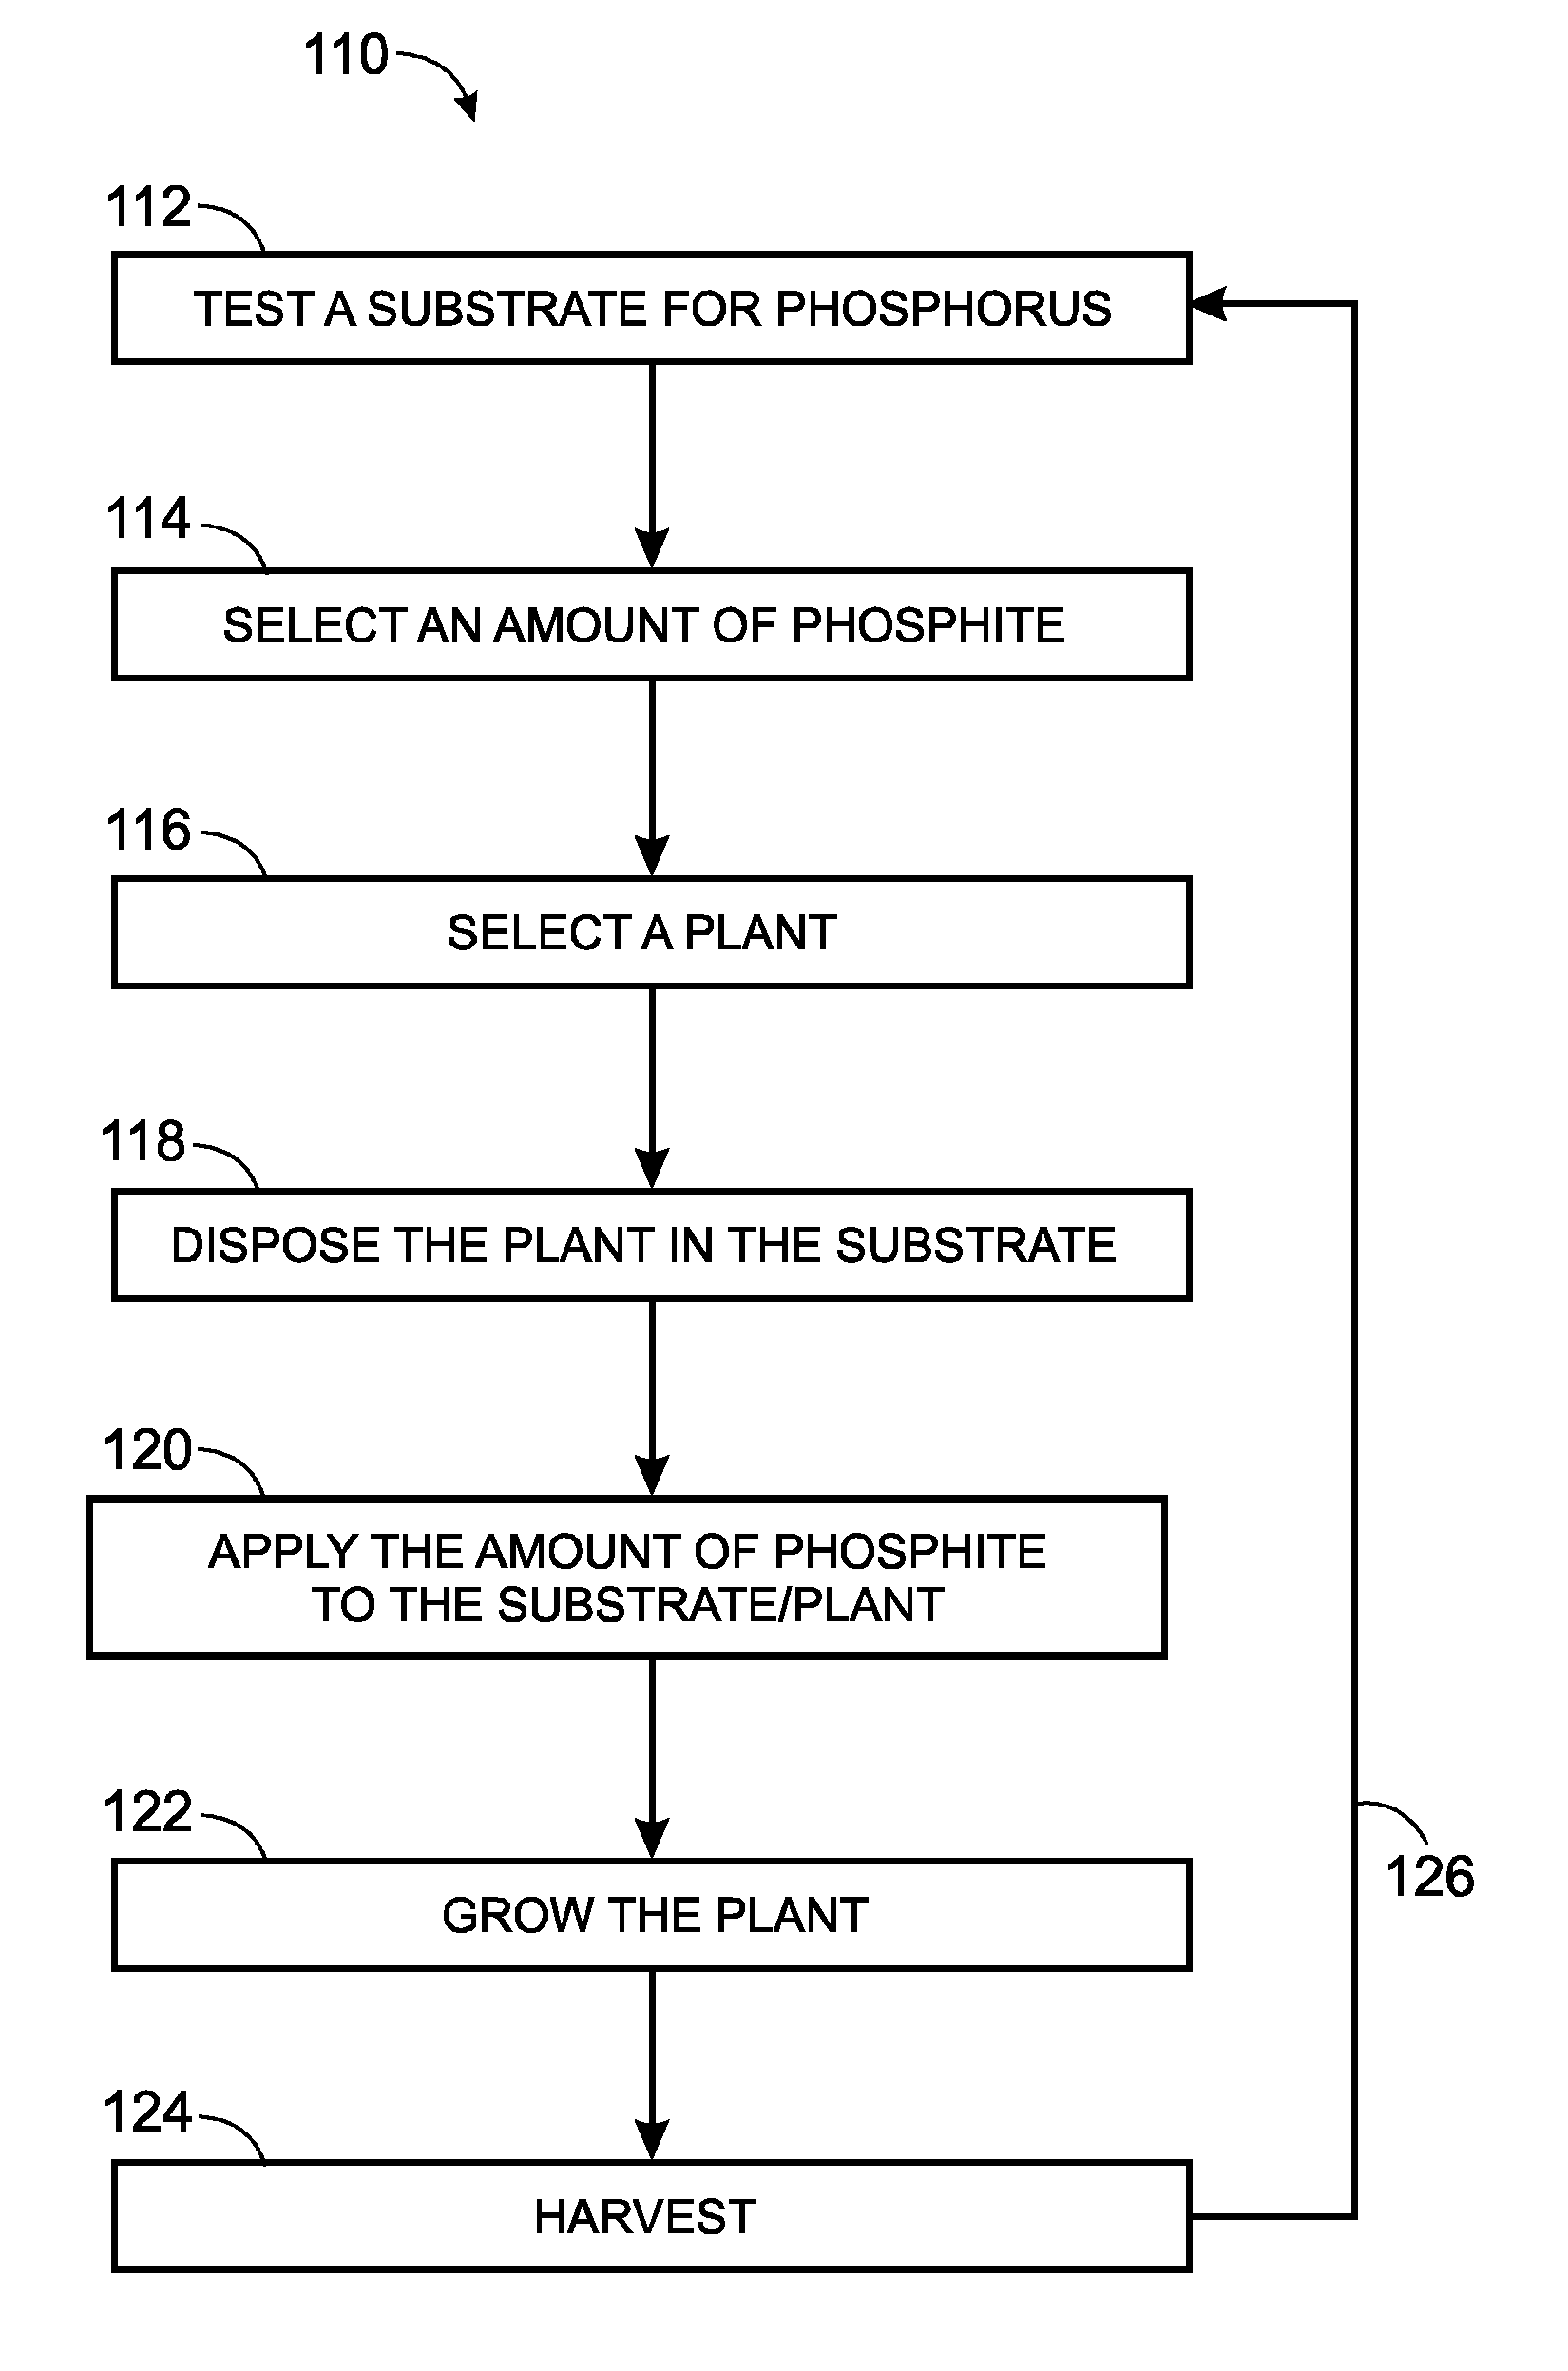 Plant cultivation system utilizing phosphite as a nutrient and as a control agent for weeds and algae